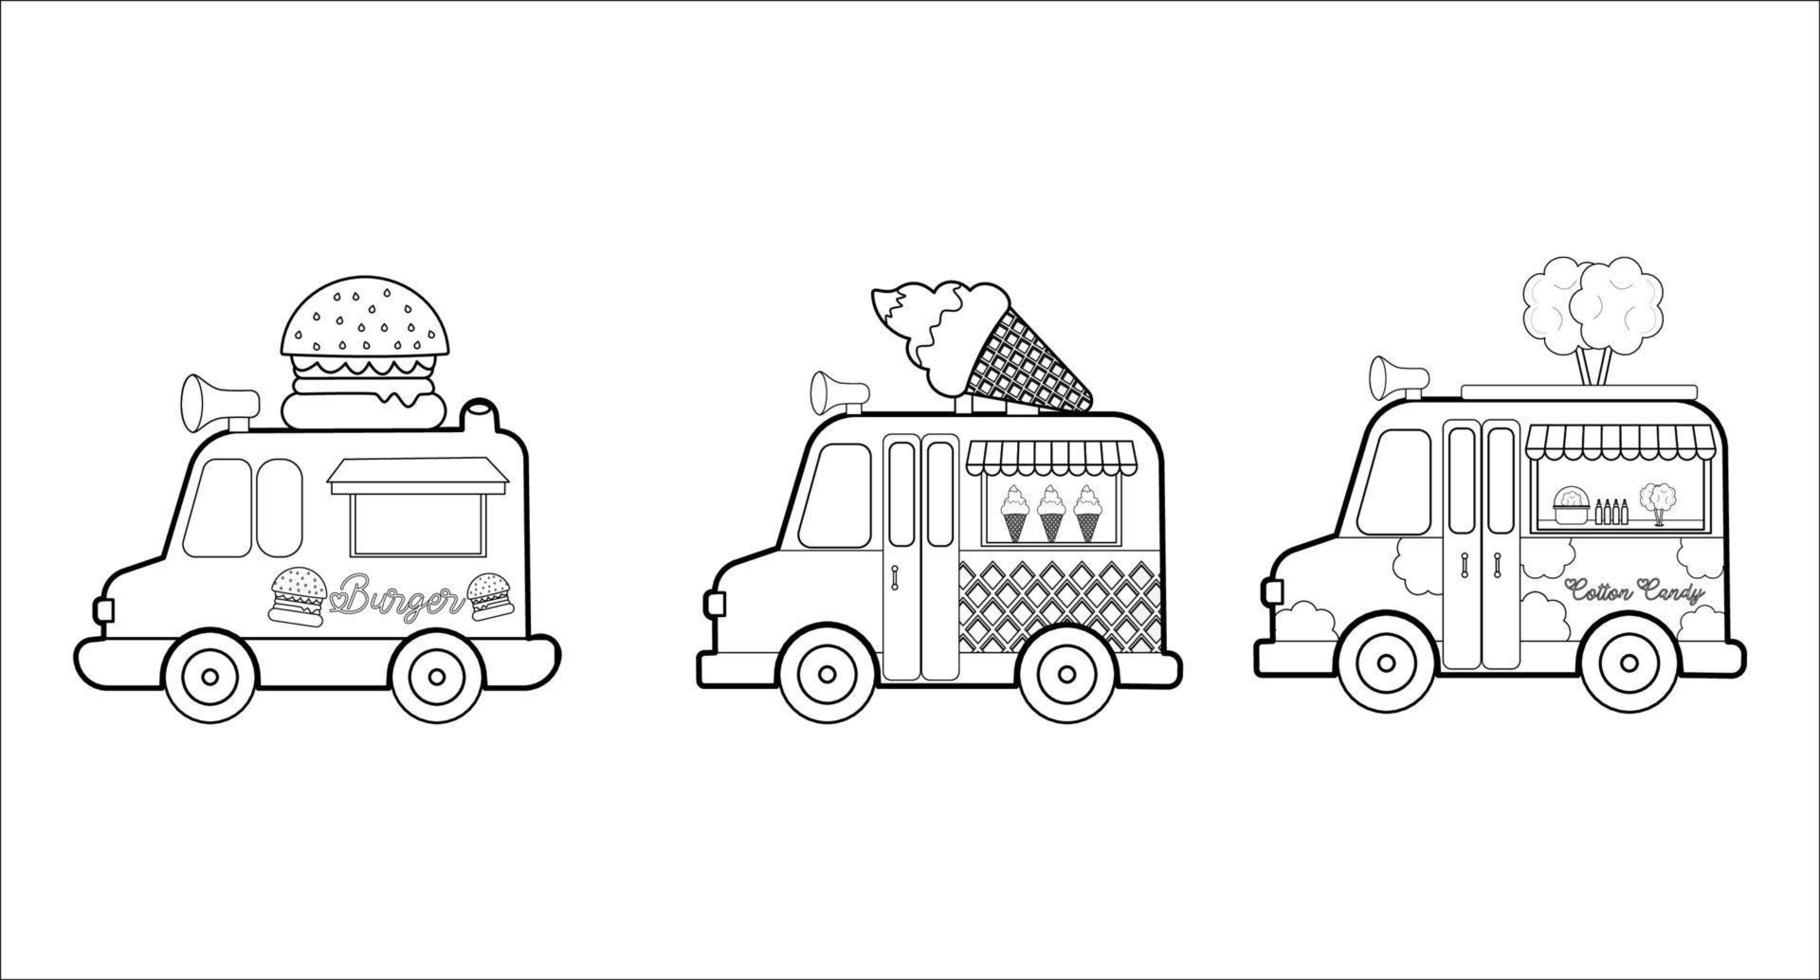 Coloring pages.  Food truck. Cartoon clipart set for kids activity colouring book. Vector illustration.